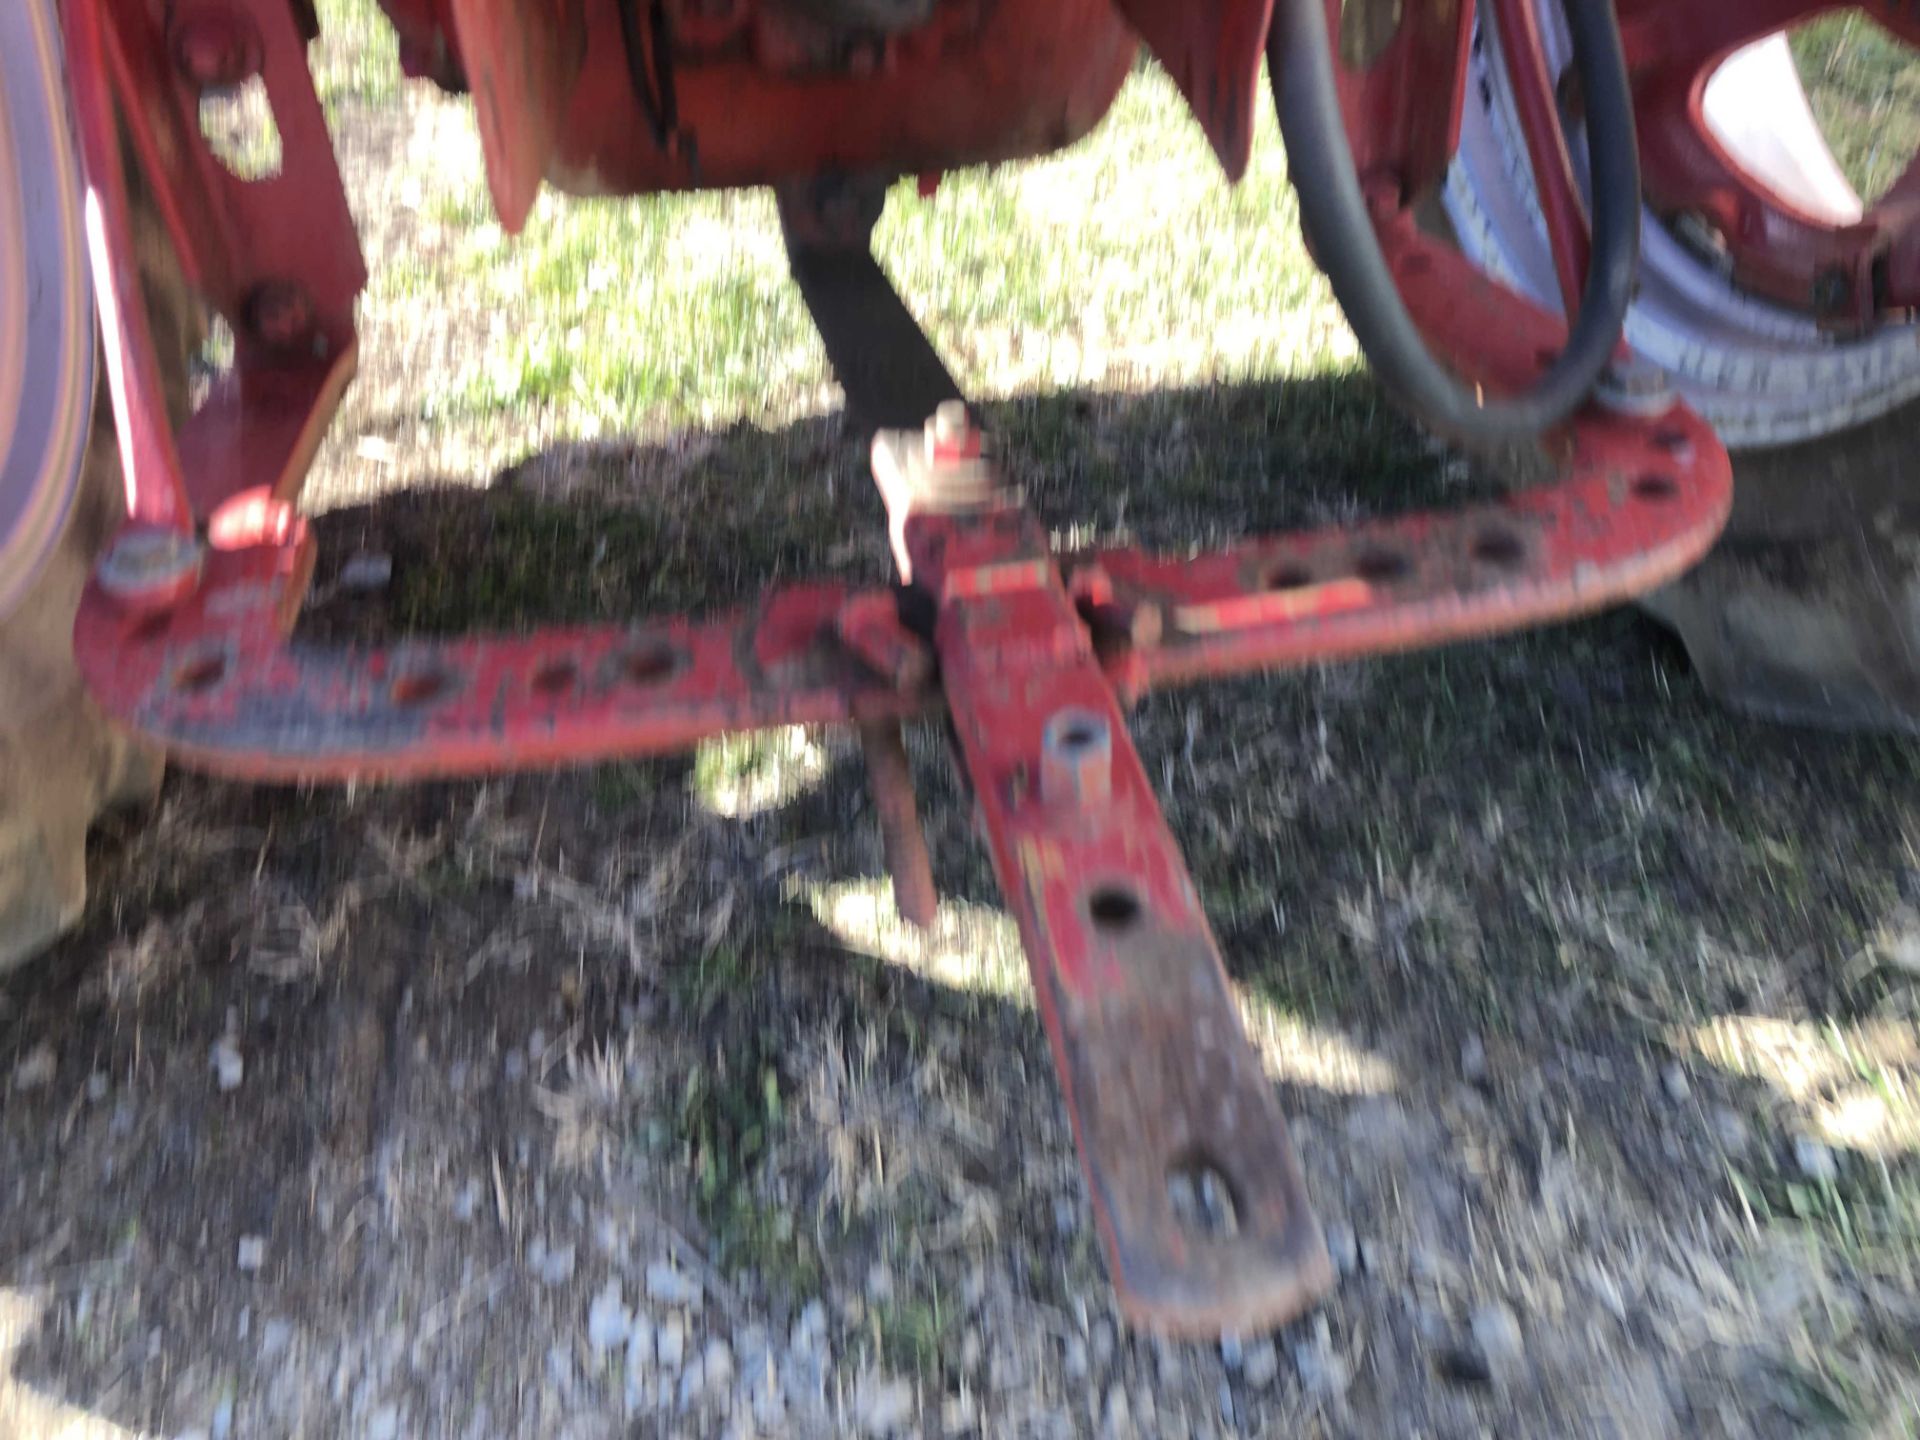 Farmall Super M tractor, 15.5-38 rears, narrow front, gas, SN L511380 J - Image 12 of 15